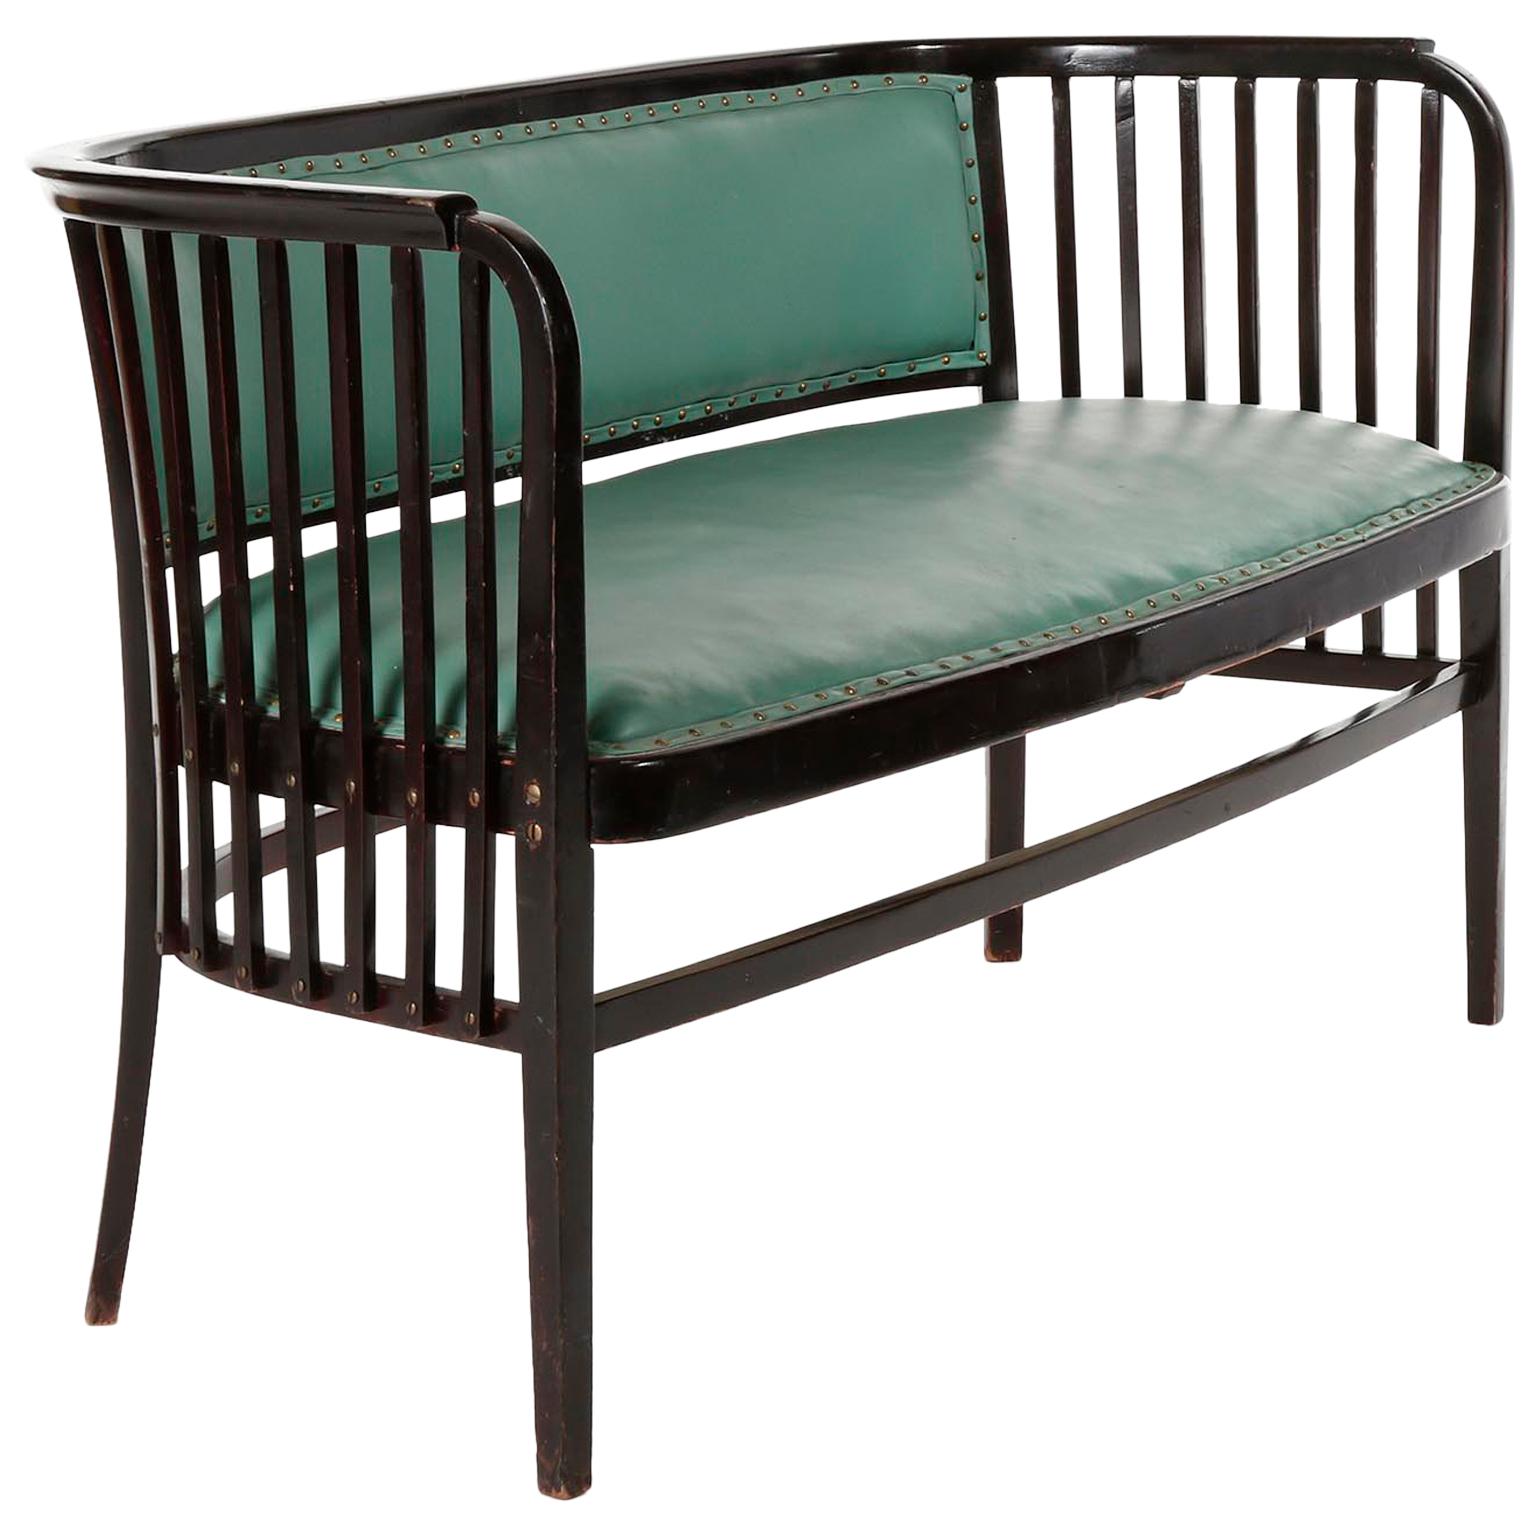 Marcel Kammerer Settee Bench Seat, Thonet Austria, Turquoise Green Leather, 1910